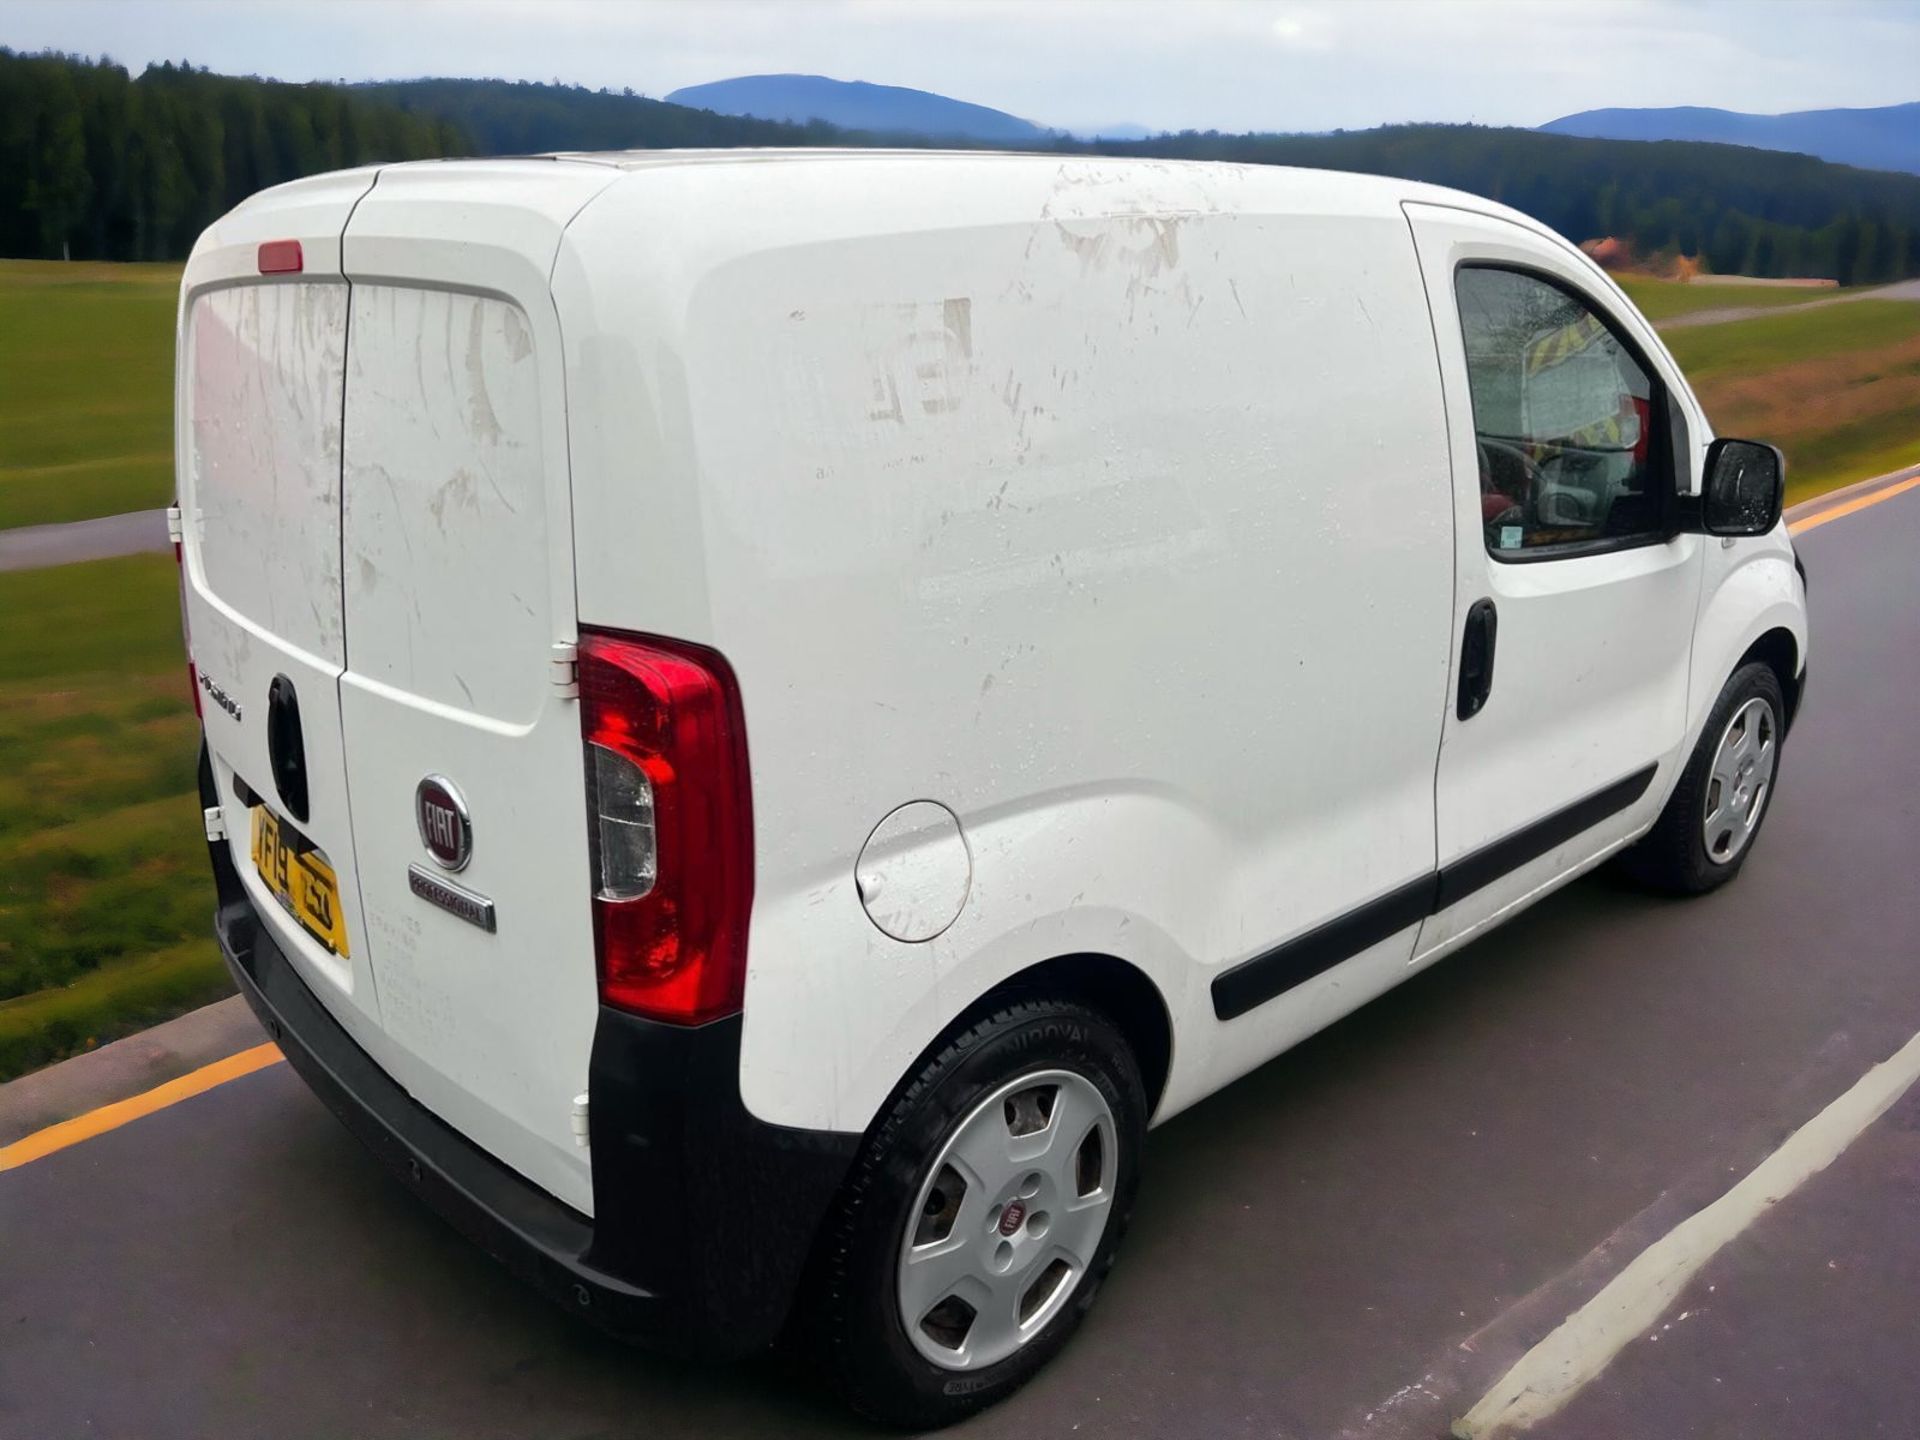 **SPARES OR REAPIRS** 2019 FIAT FIORINO SX 1.3 HDI VAN - YOUR RELIABLE BUSINESS COMPANION - Bild 2 aus 11